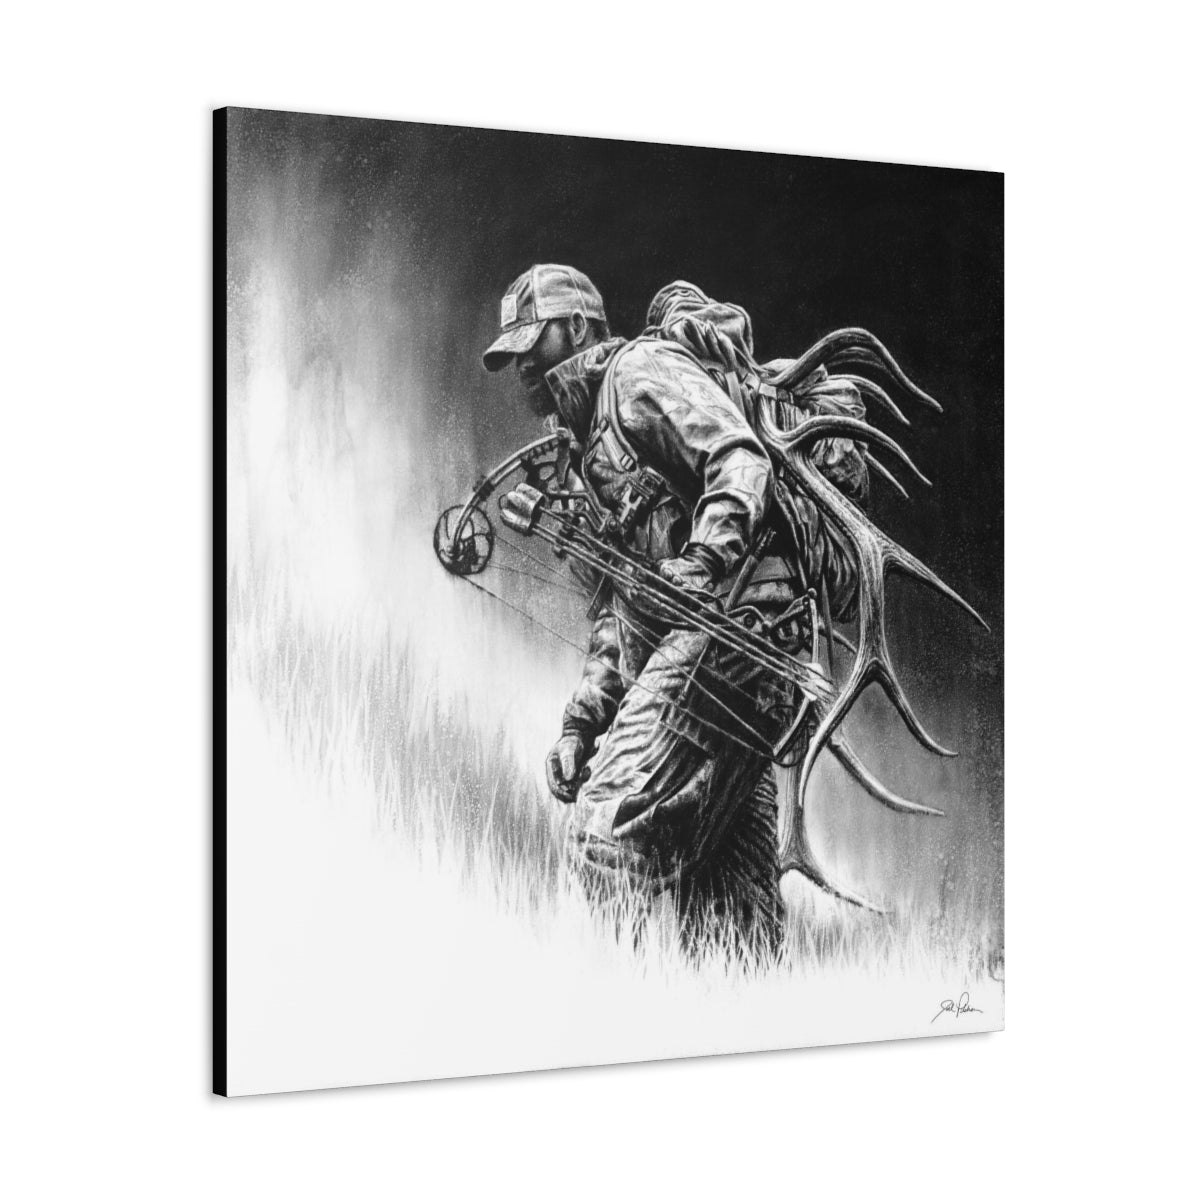 "Uphill Battle" Gallery Wrapped Canvas